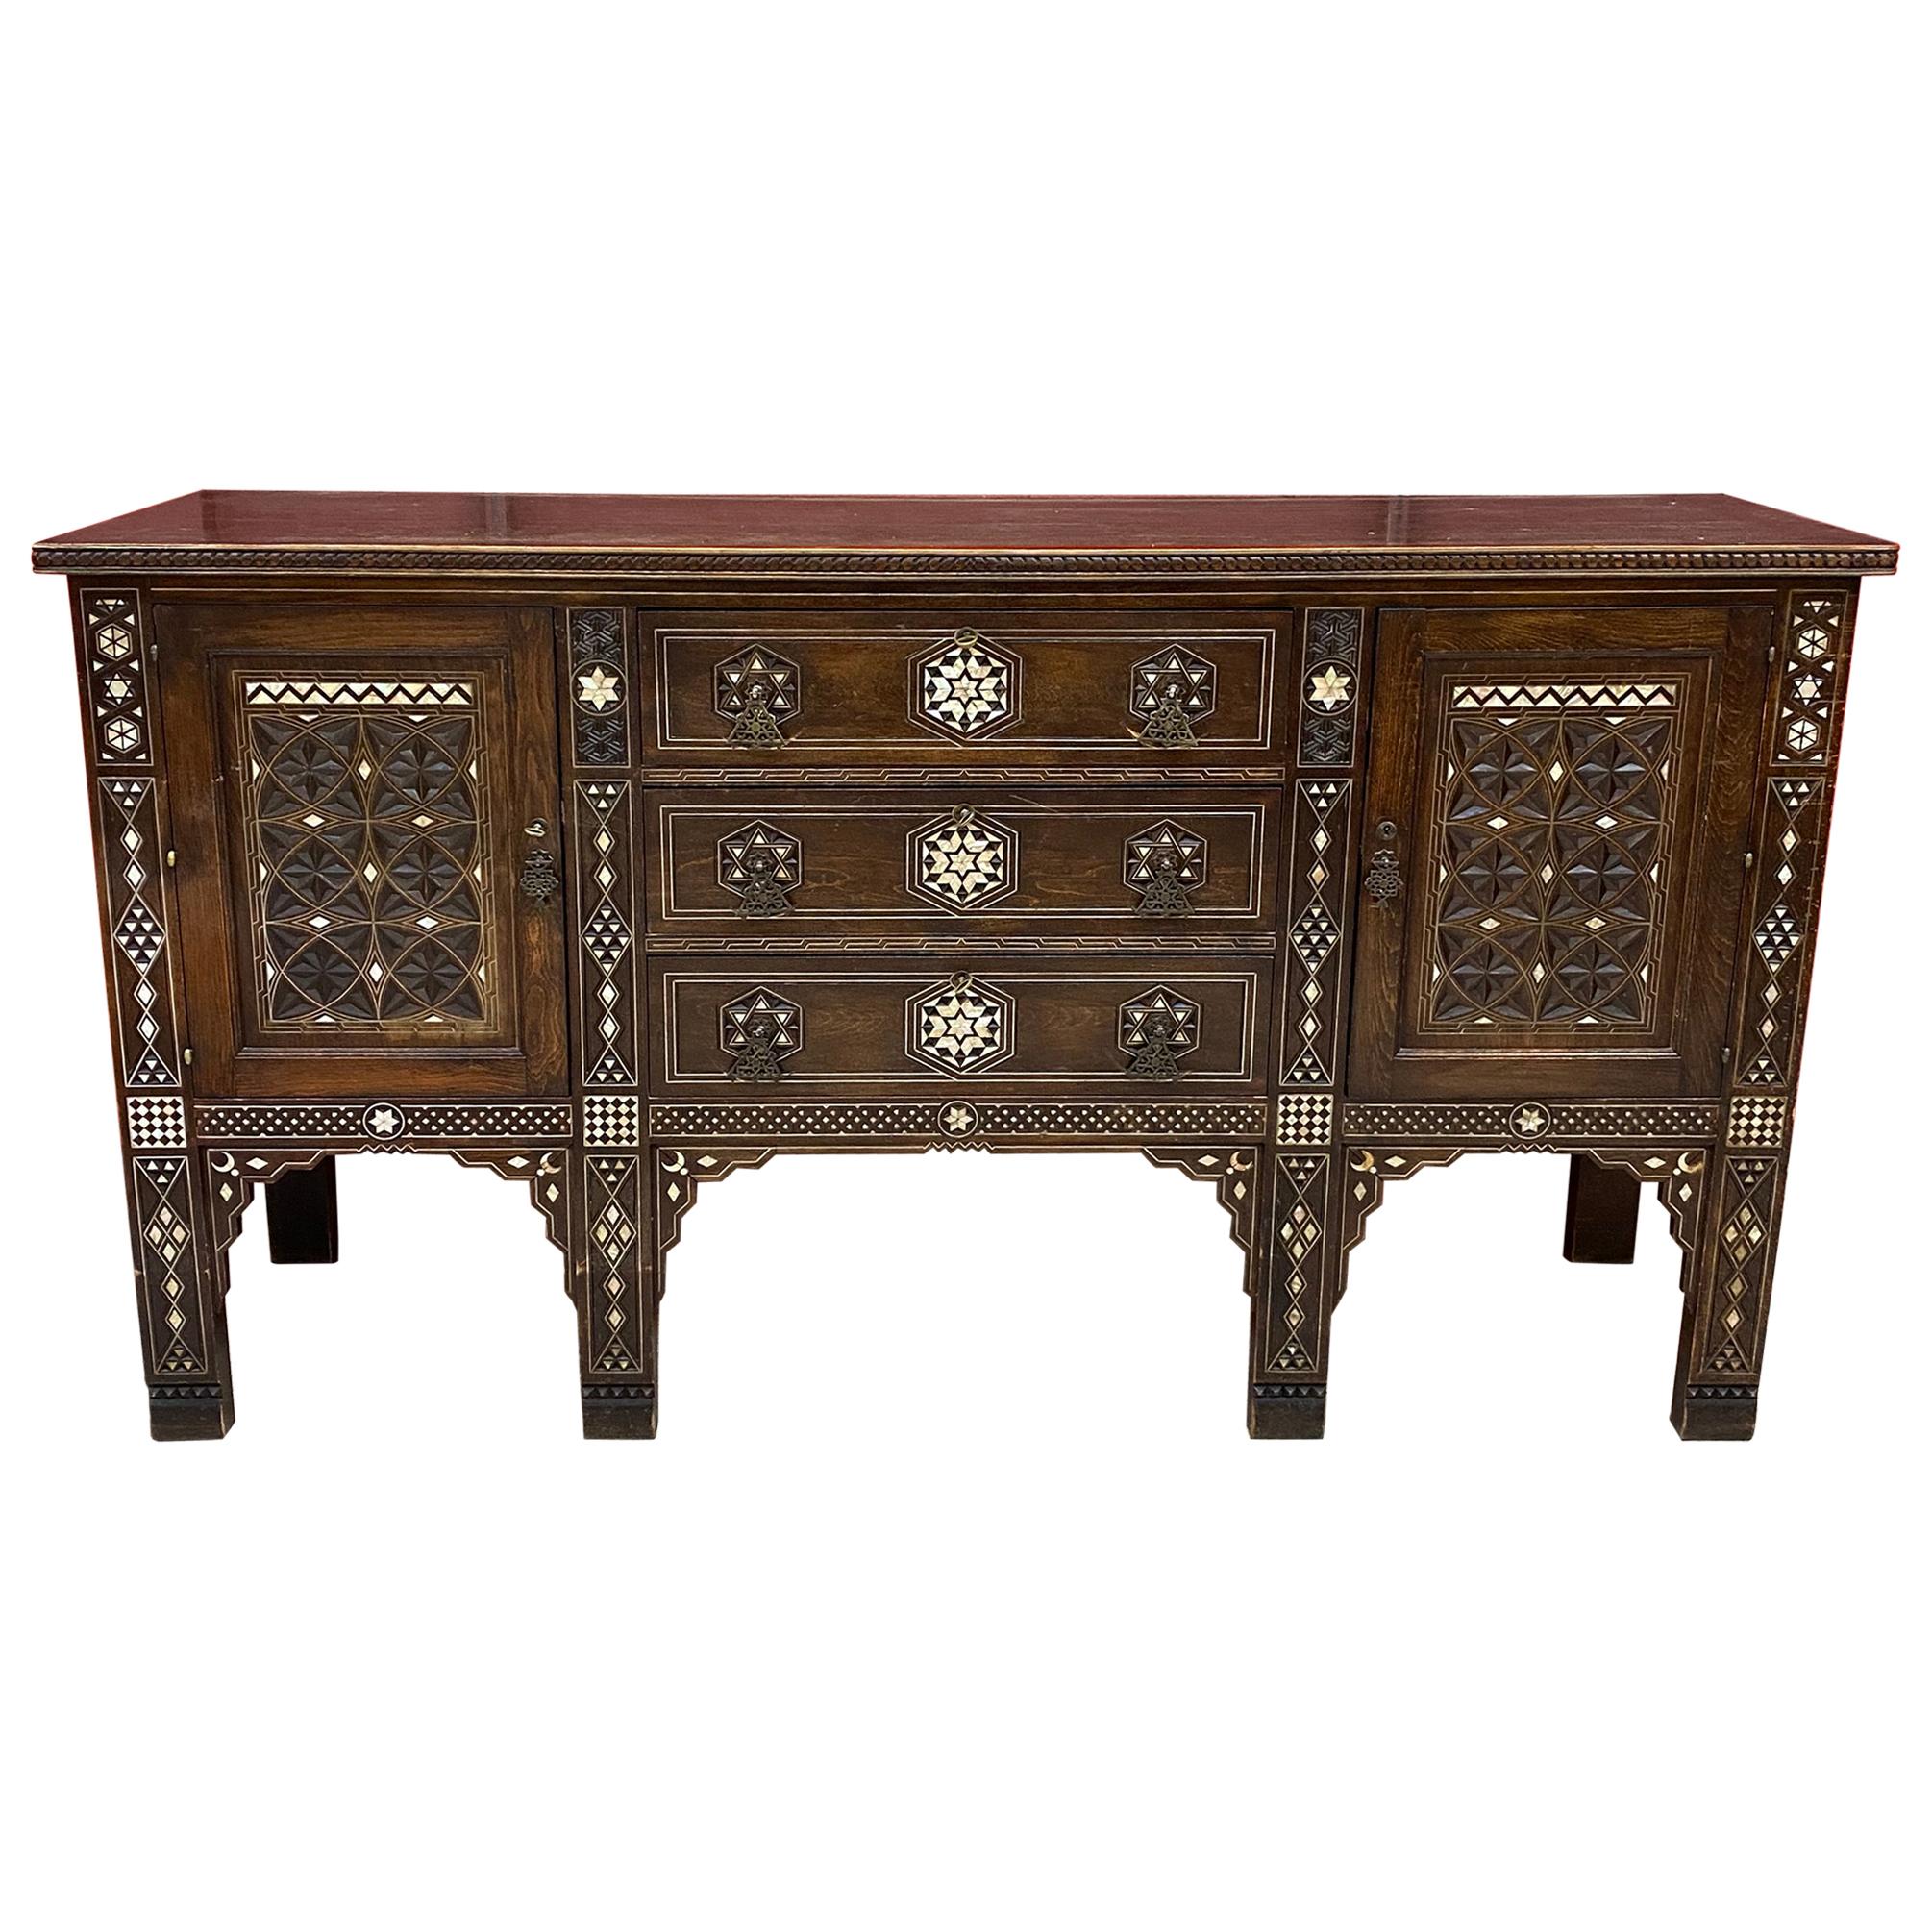 Large Oriental-Style Sideboard in carved Wood, with Mother-of-Pearl Inlay, 1880 For Sale